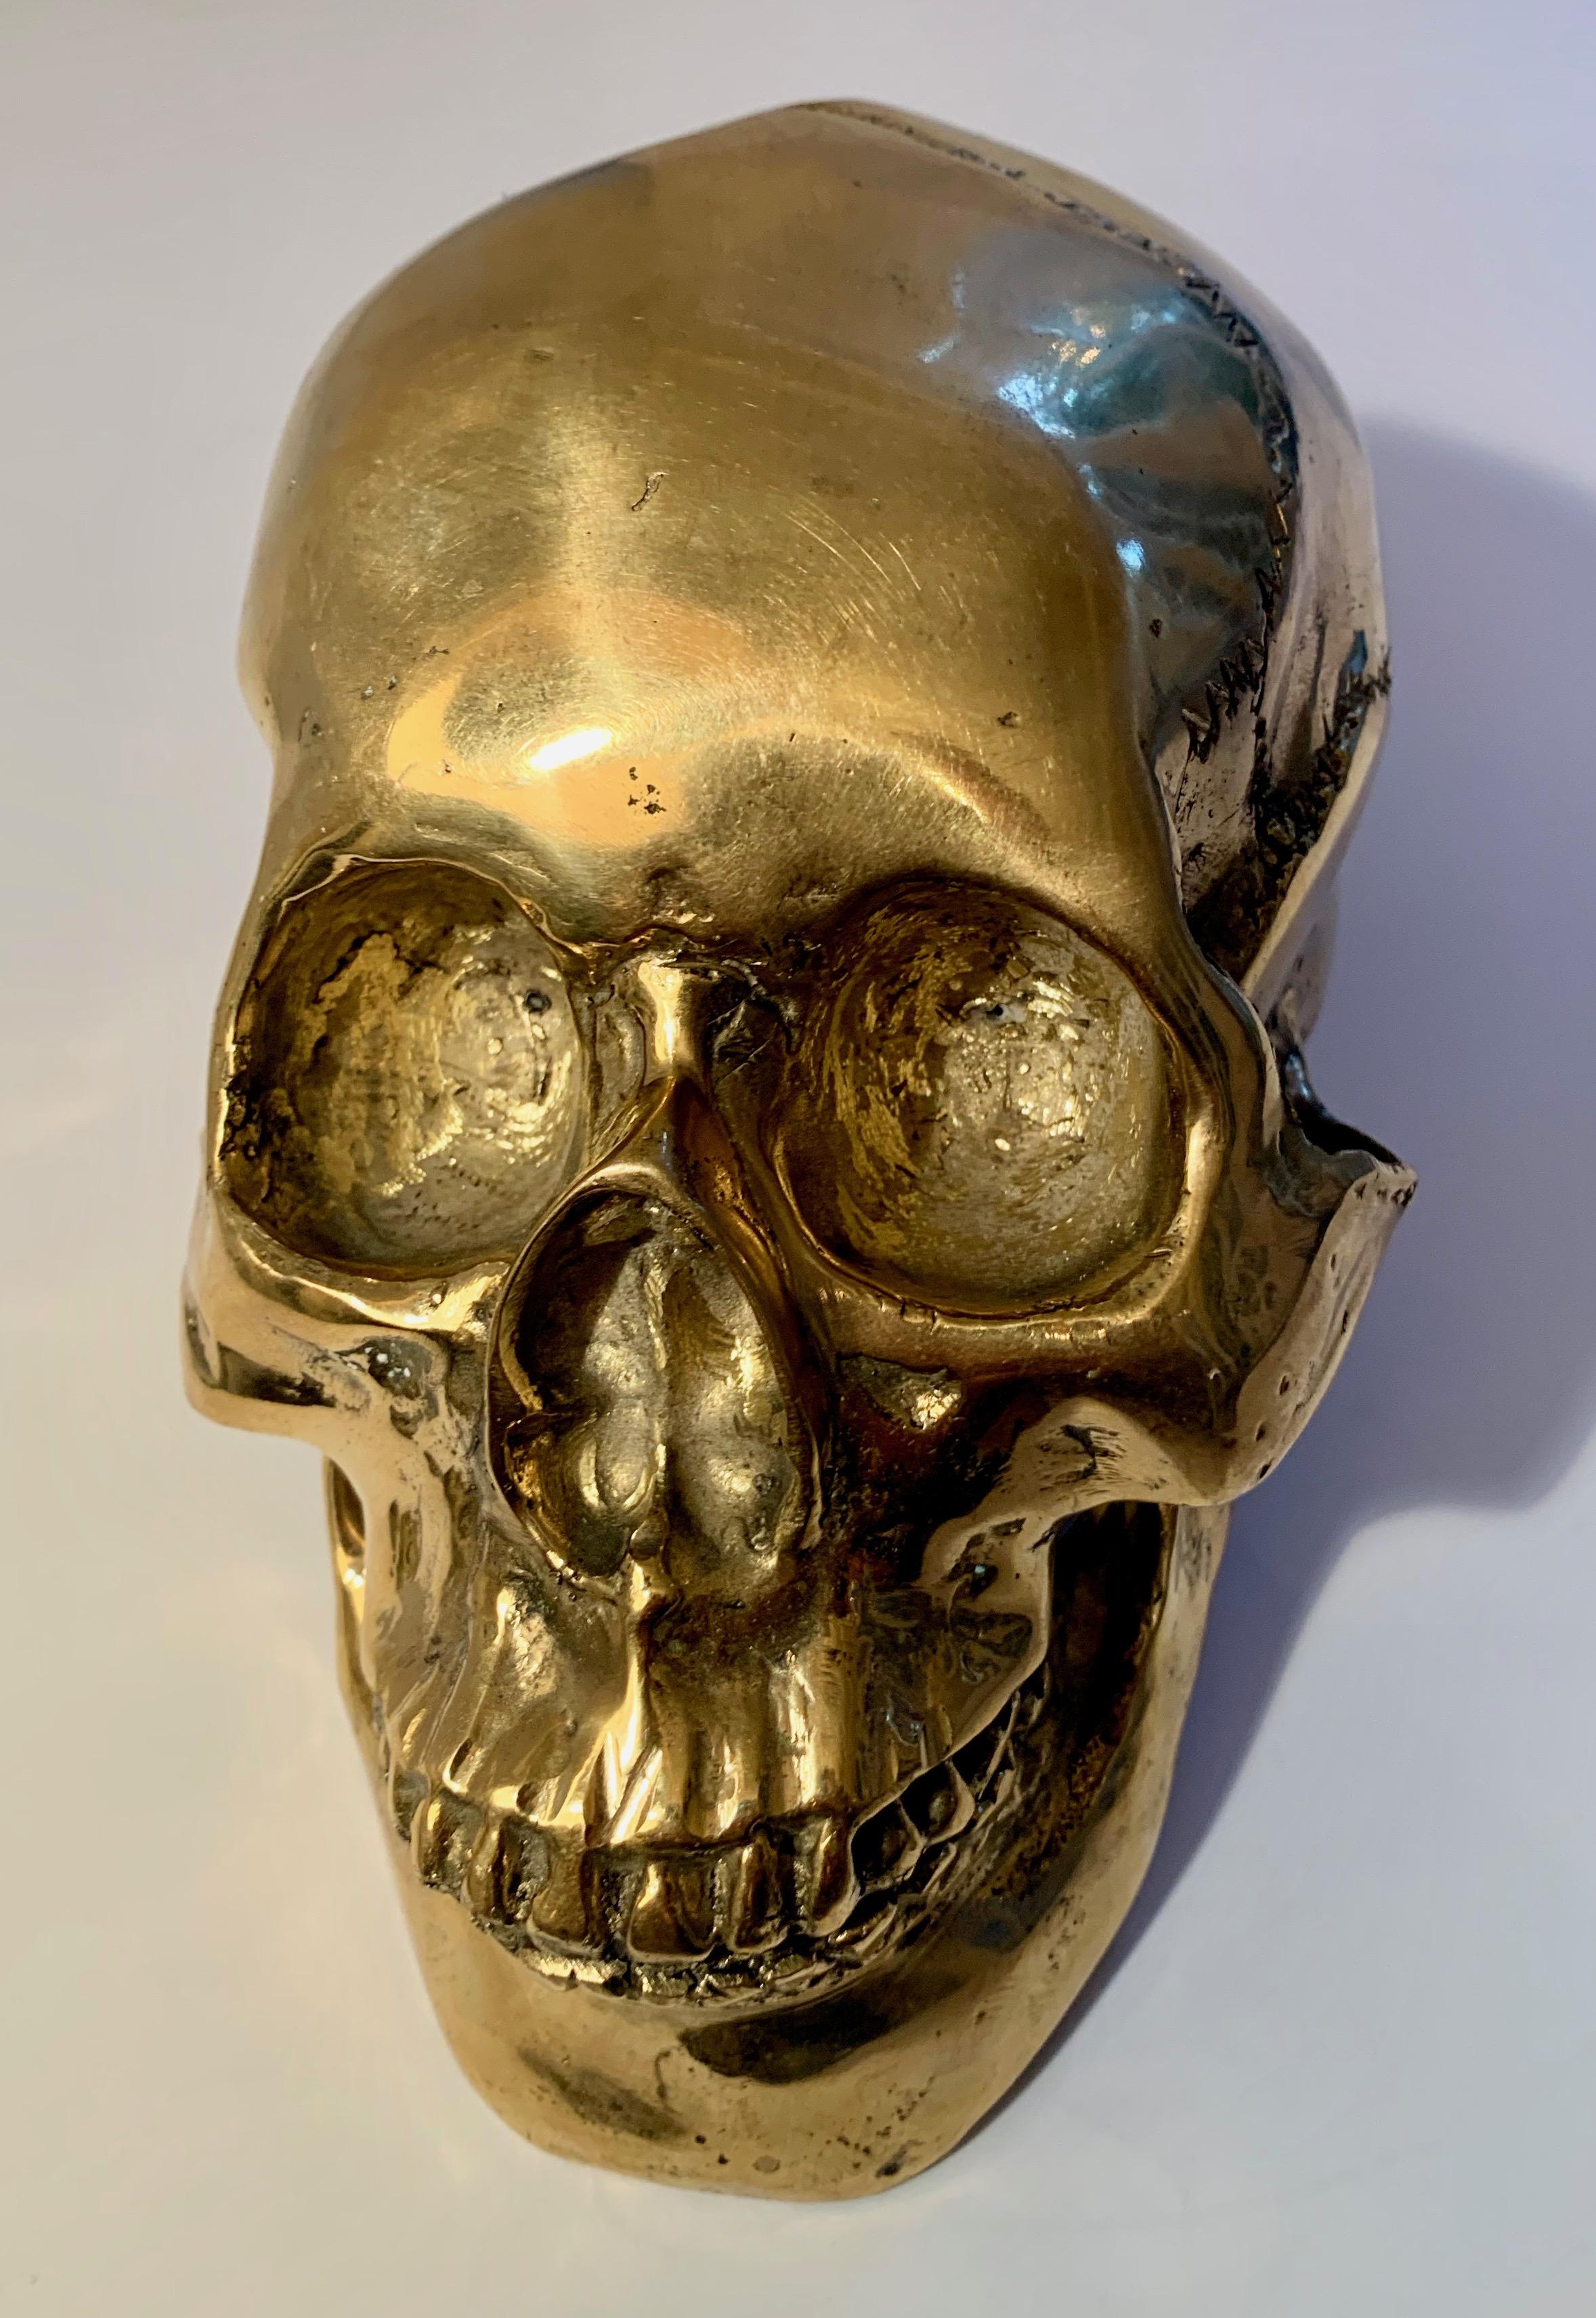 A wonderful brass skull - from a decorative statement piece to use as a bookend or paper weight. A wonderful piece for many environments. Holiday gifts.